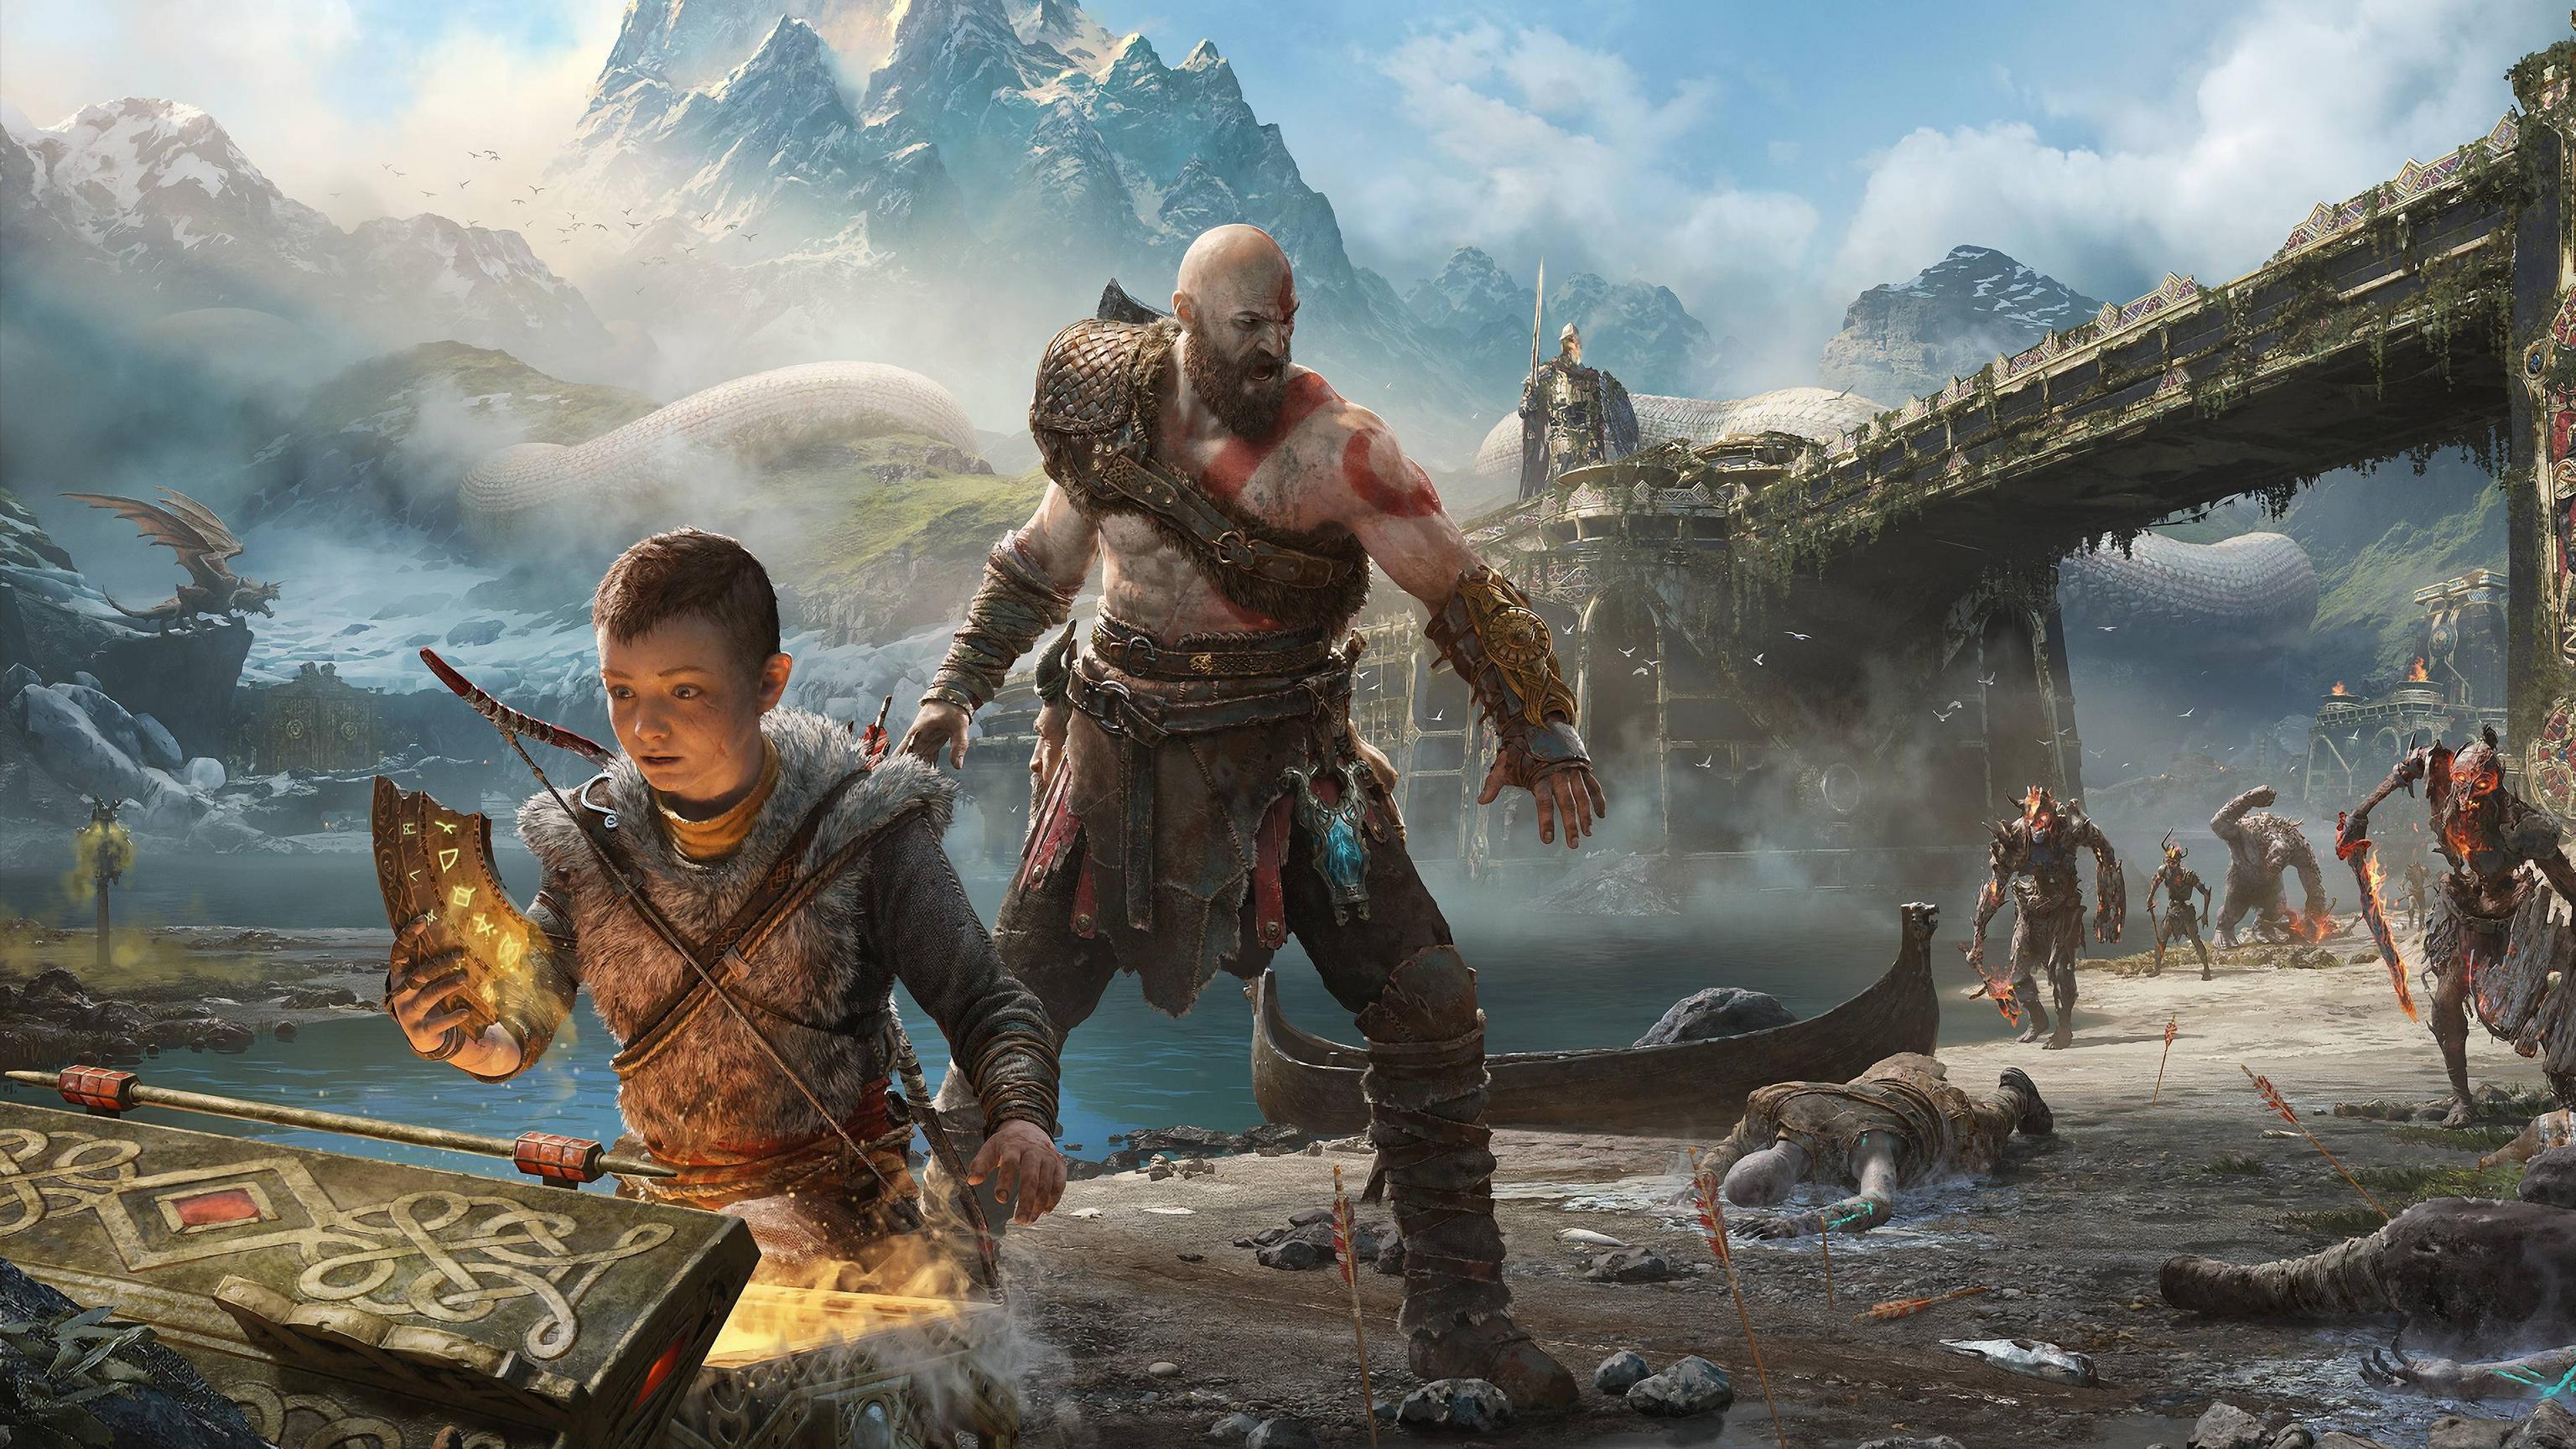 I found this after searching for a 4K GoW wallpaper and it's to good not to share!